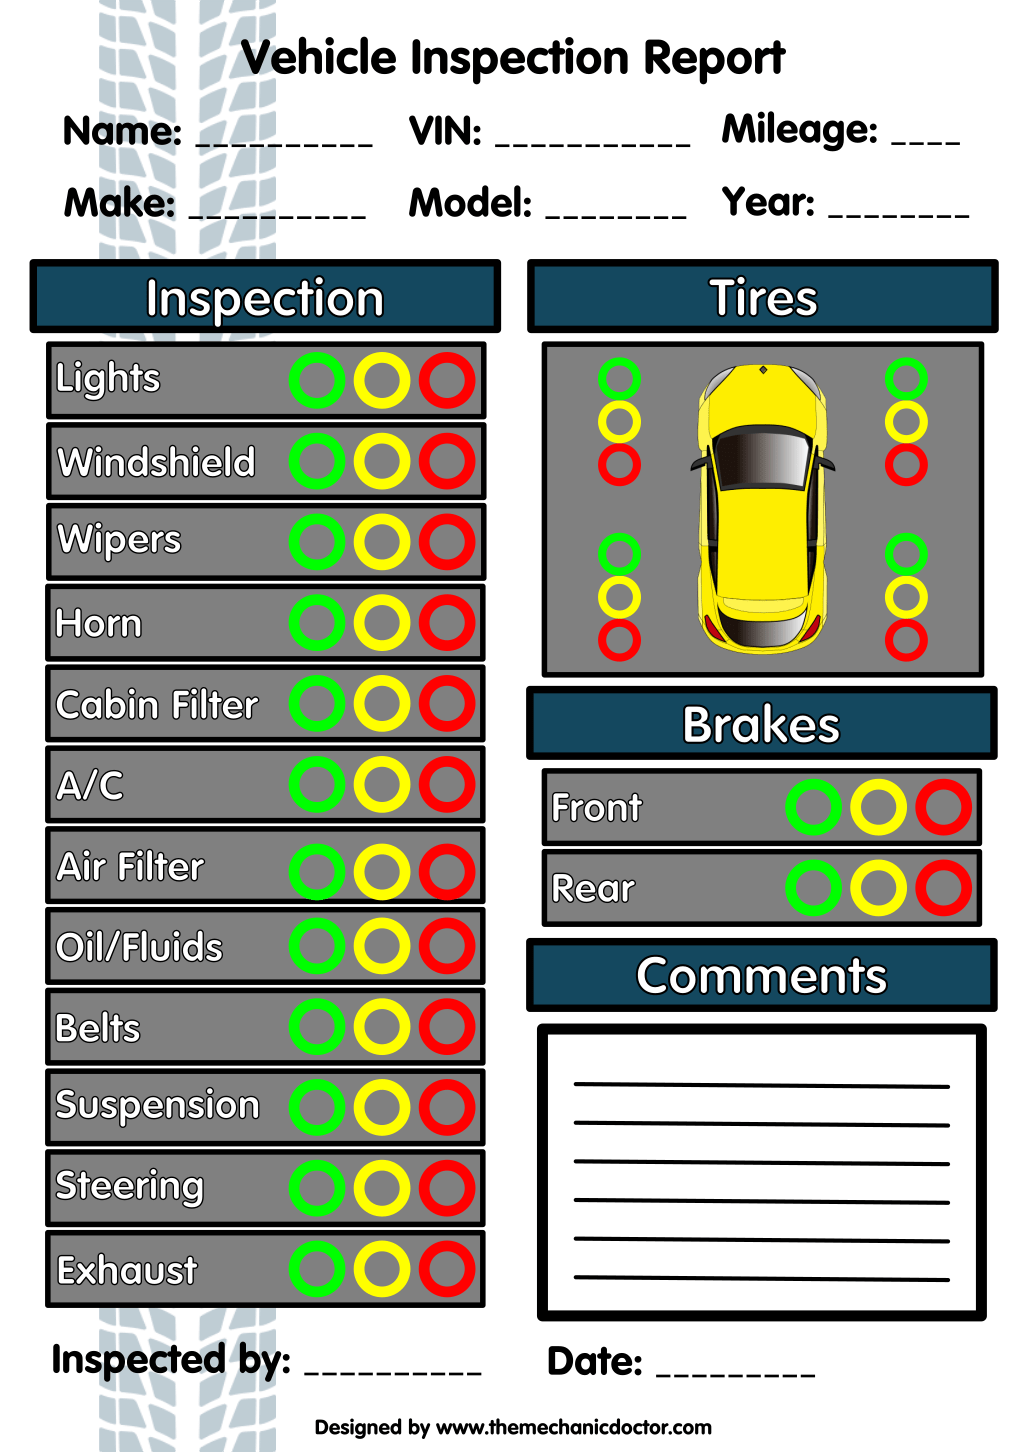 Vehicle Inspection Form Template | beneficialholdings.info